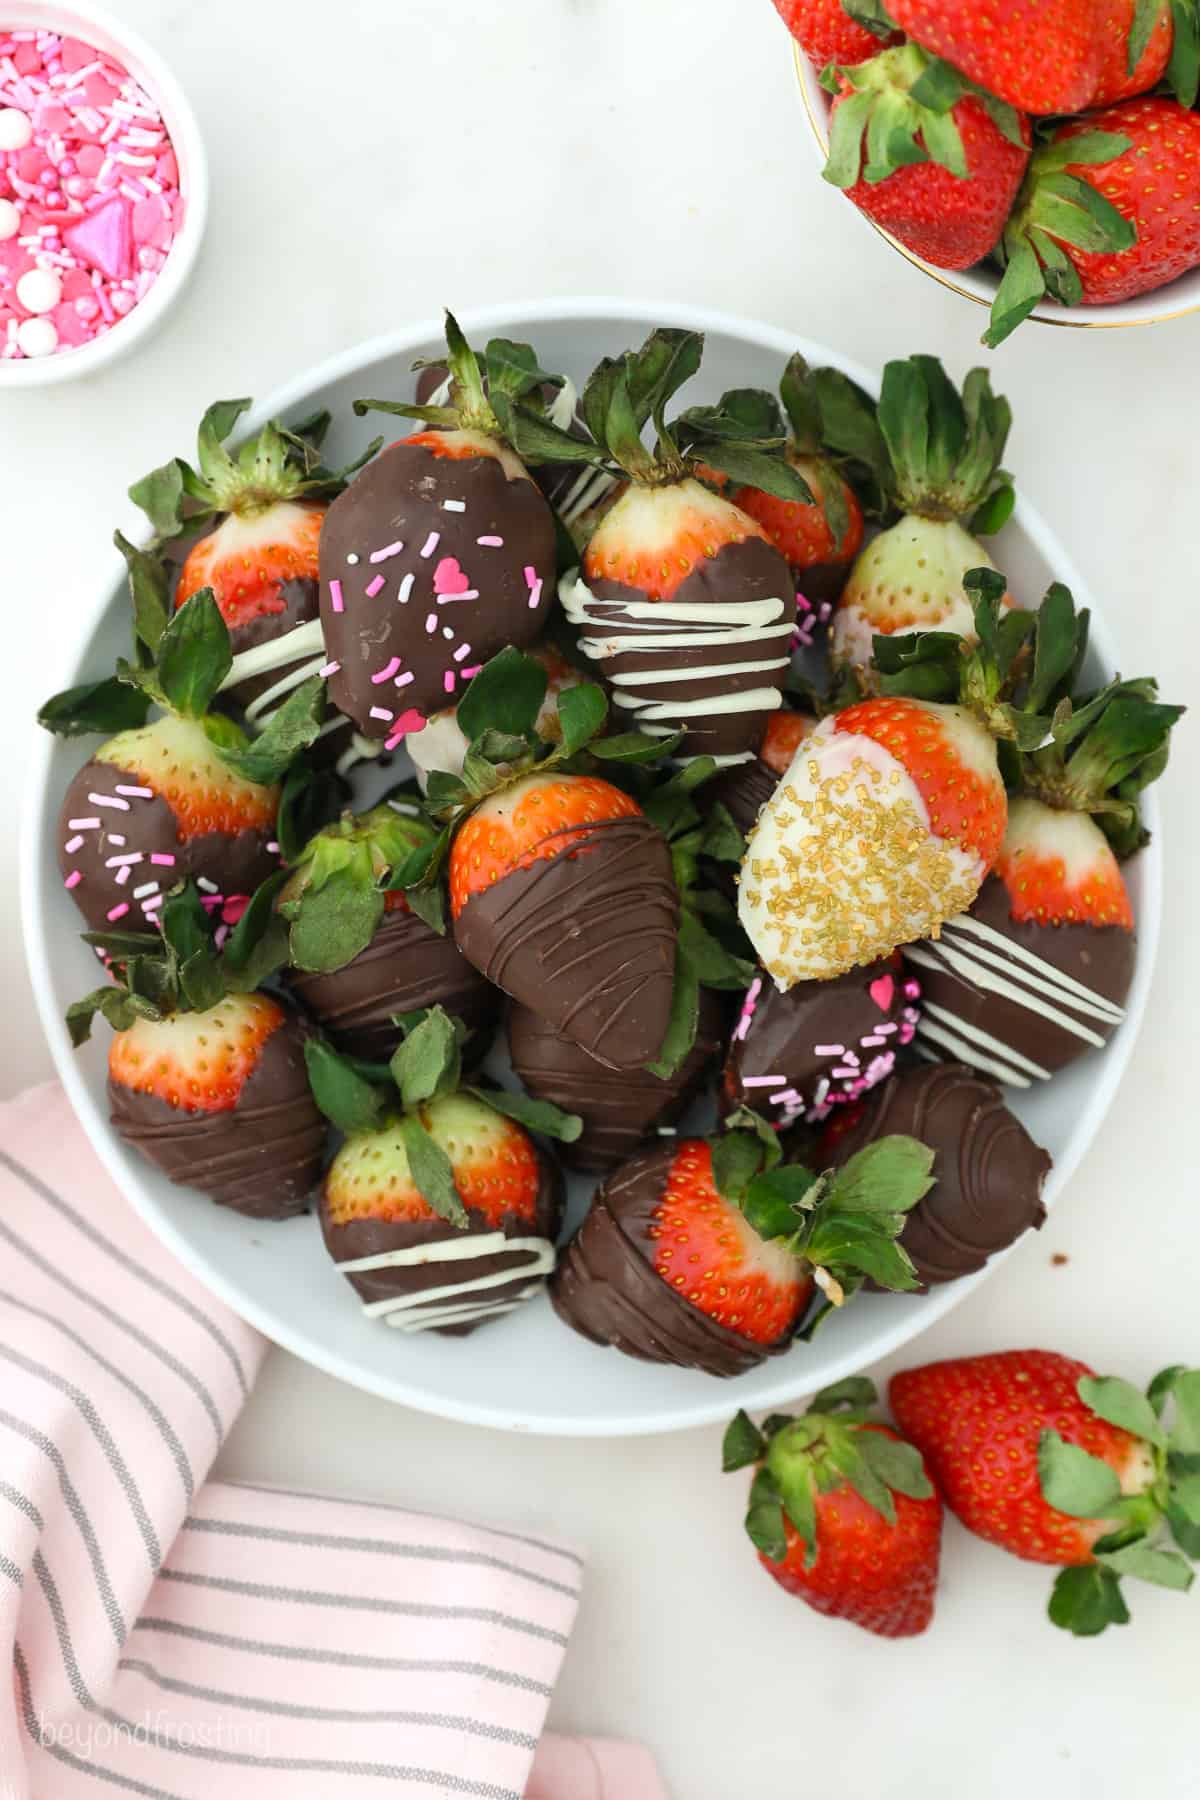 Overhead view of assorted chocolate covered strawberries arranged on a white plate.